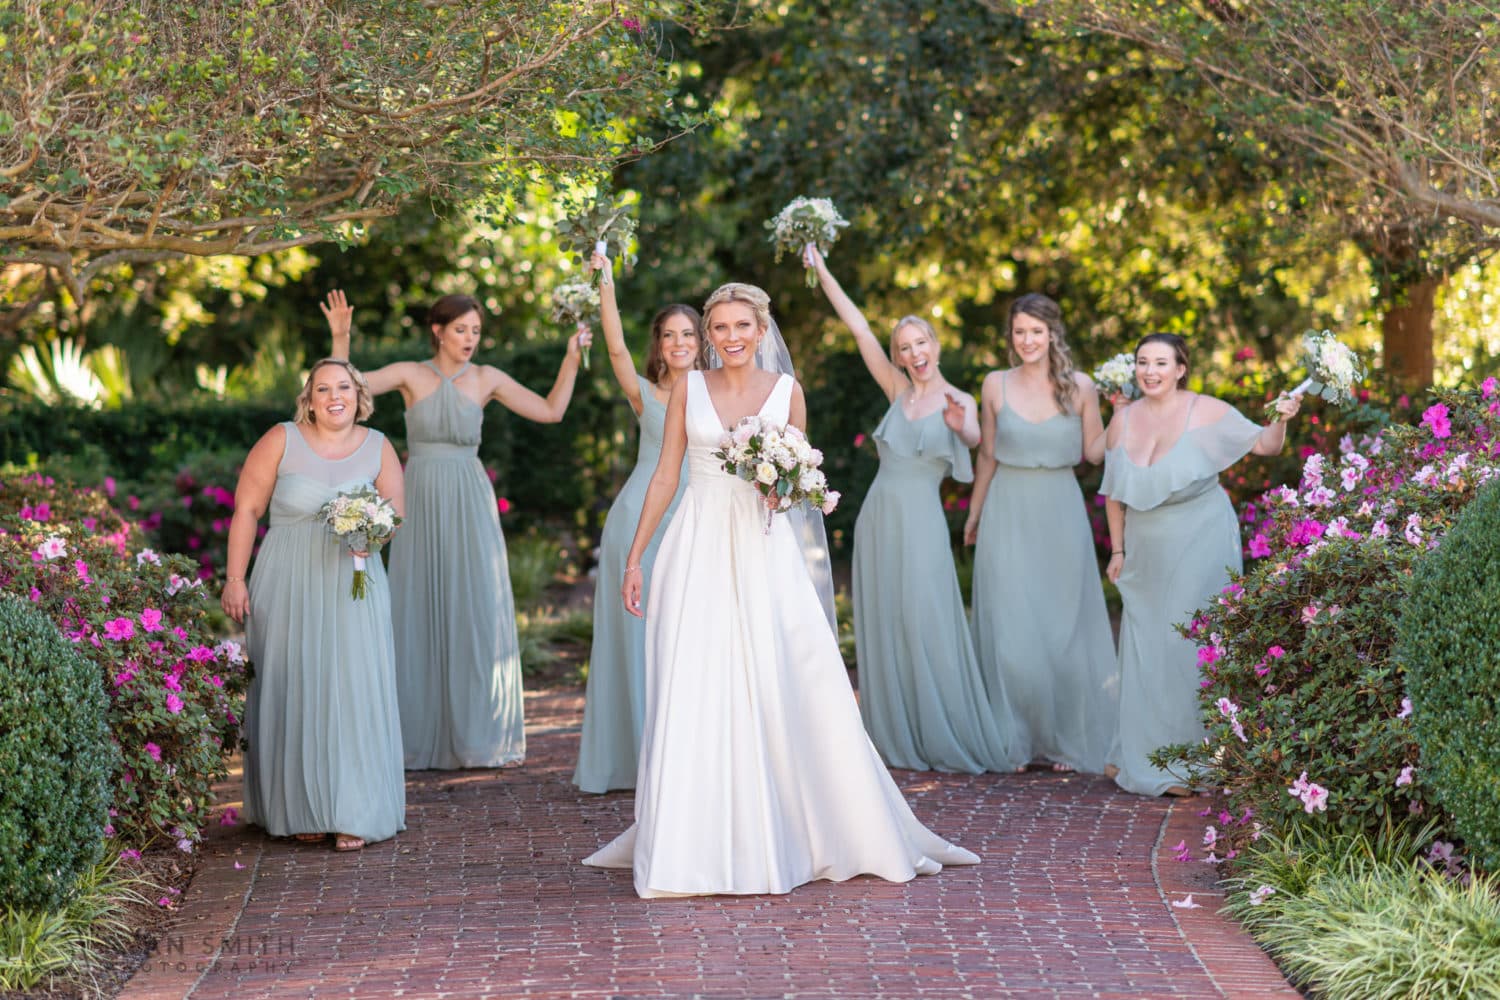 Bride and bridesmaids walking in the garden - Pine Lakes Country Club